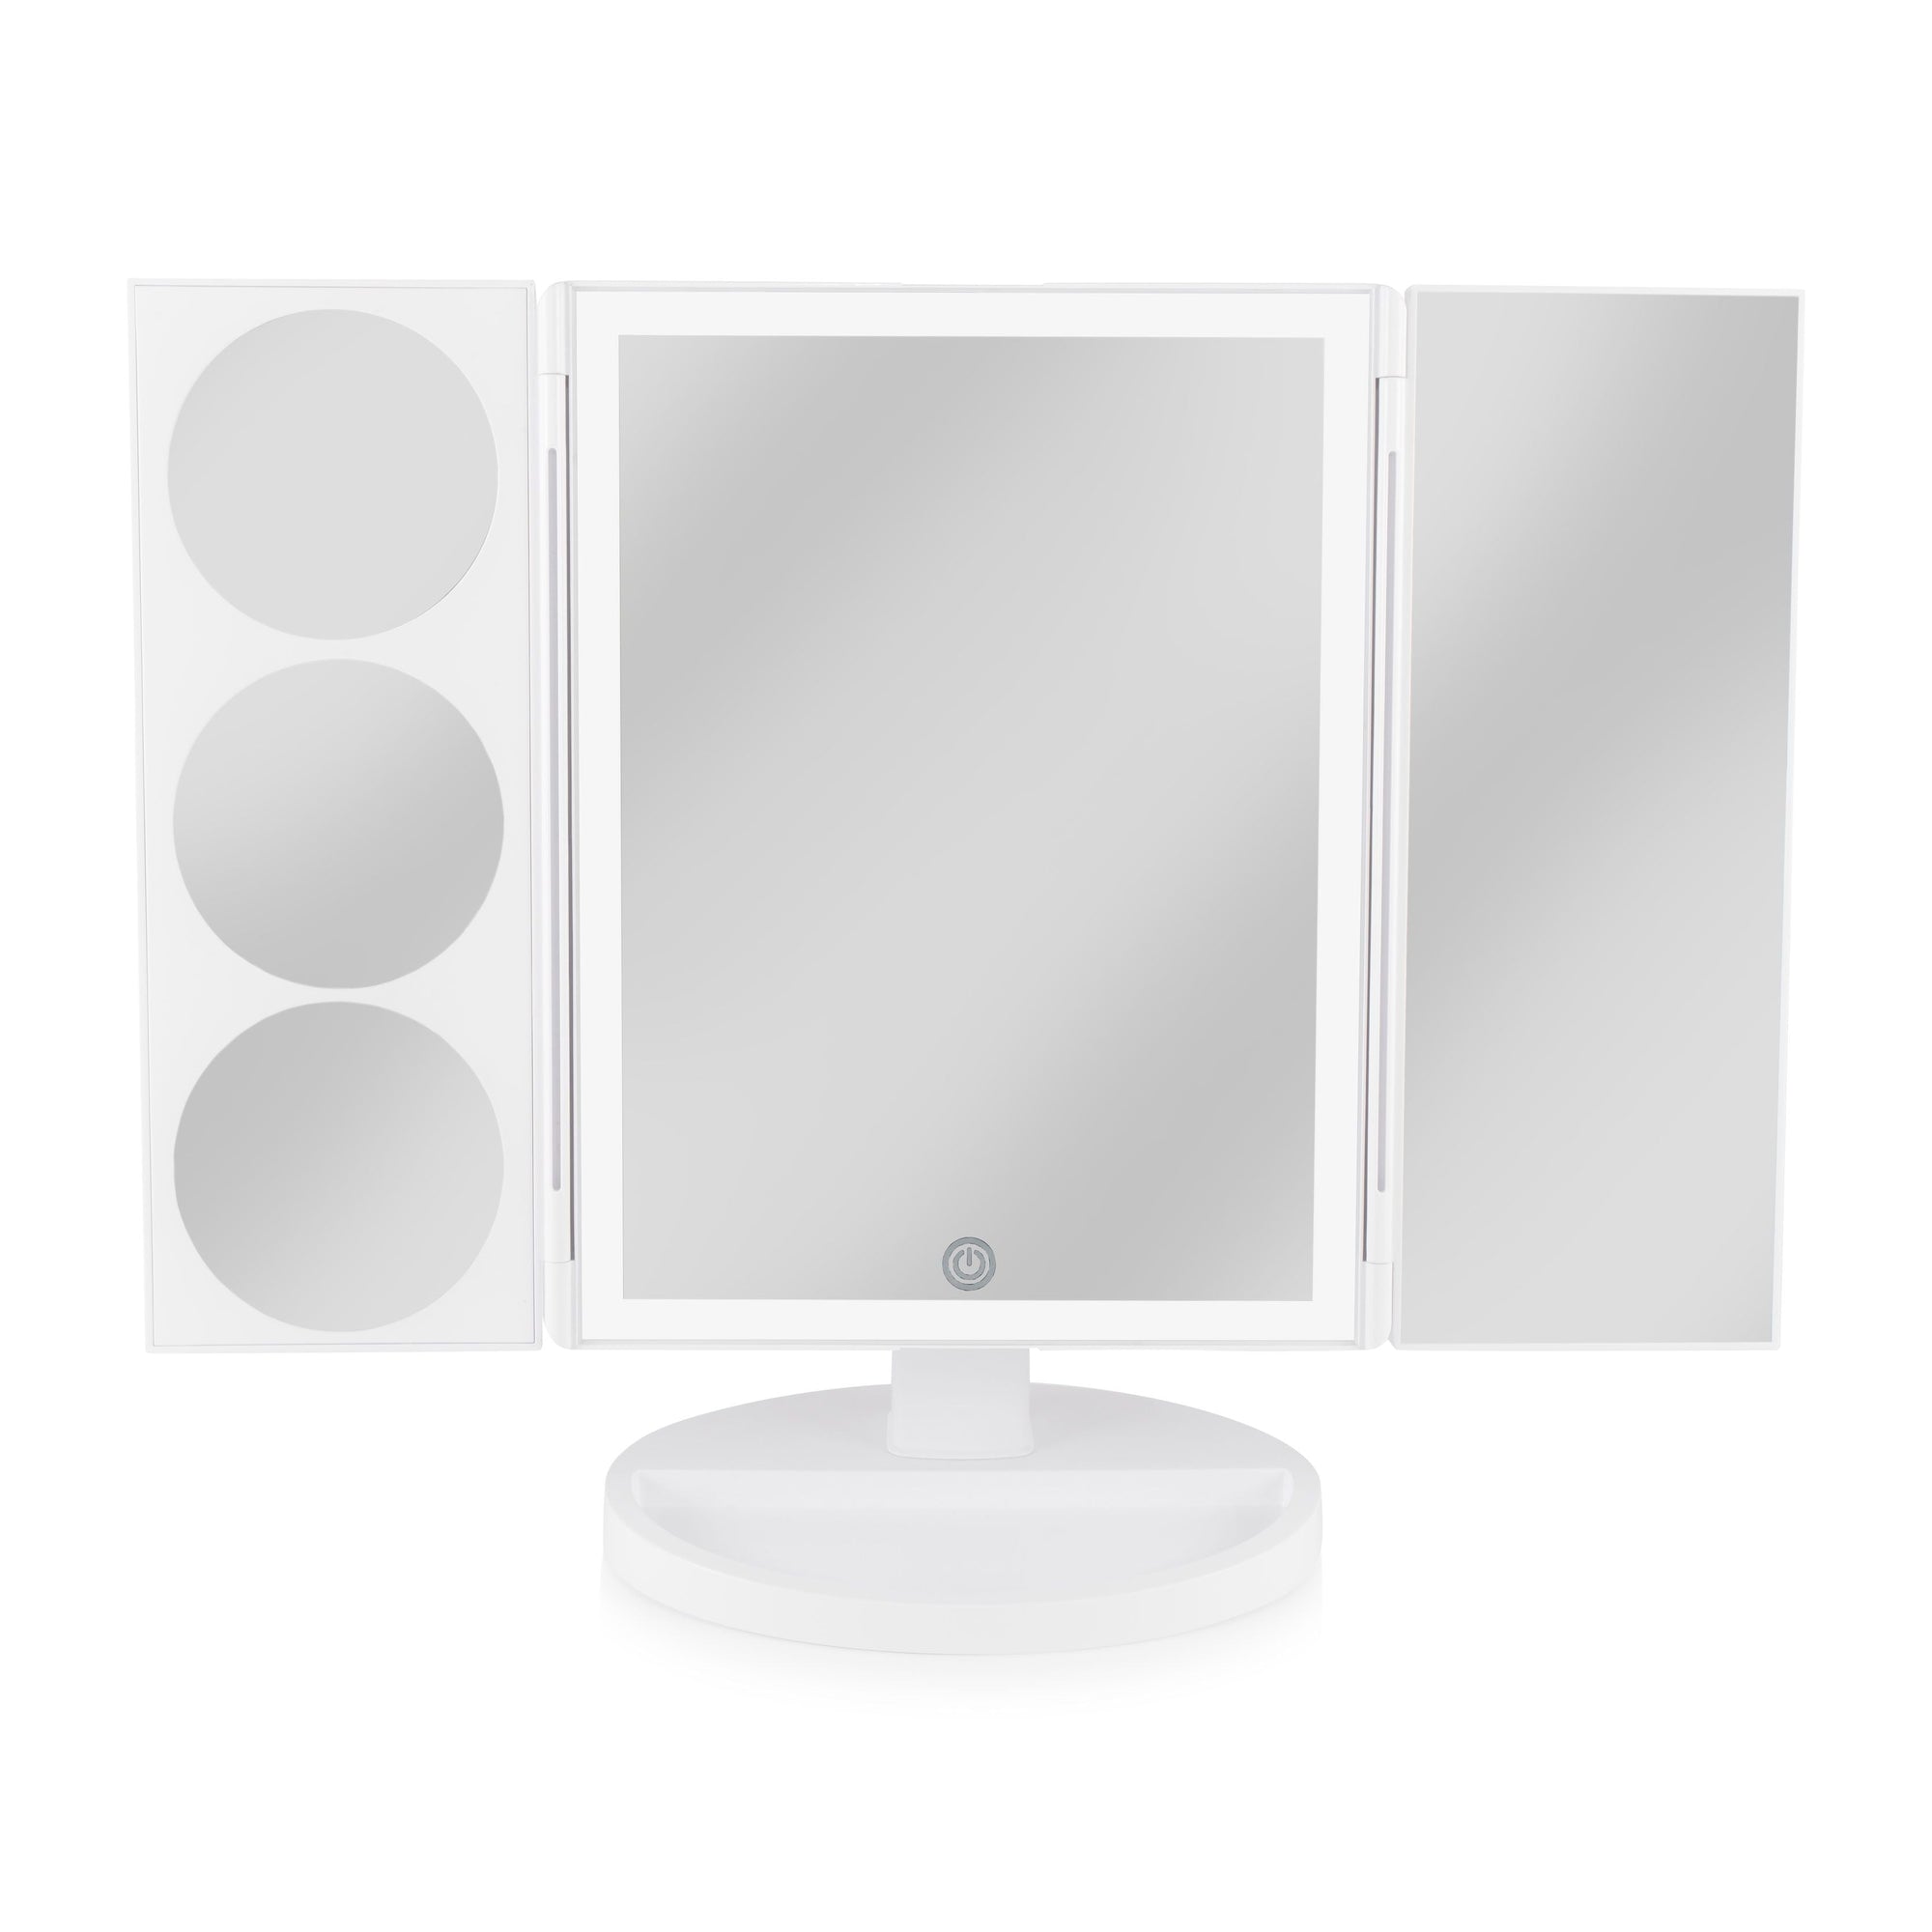 Full size LED make up mirror 1x 3x 5x 10x magnification